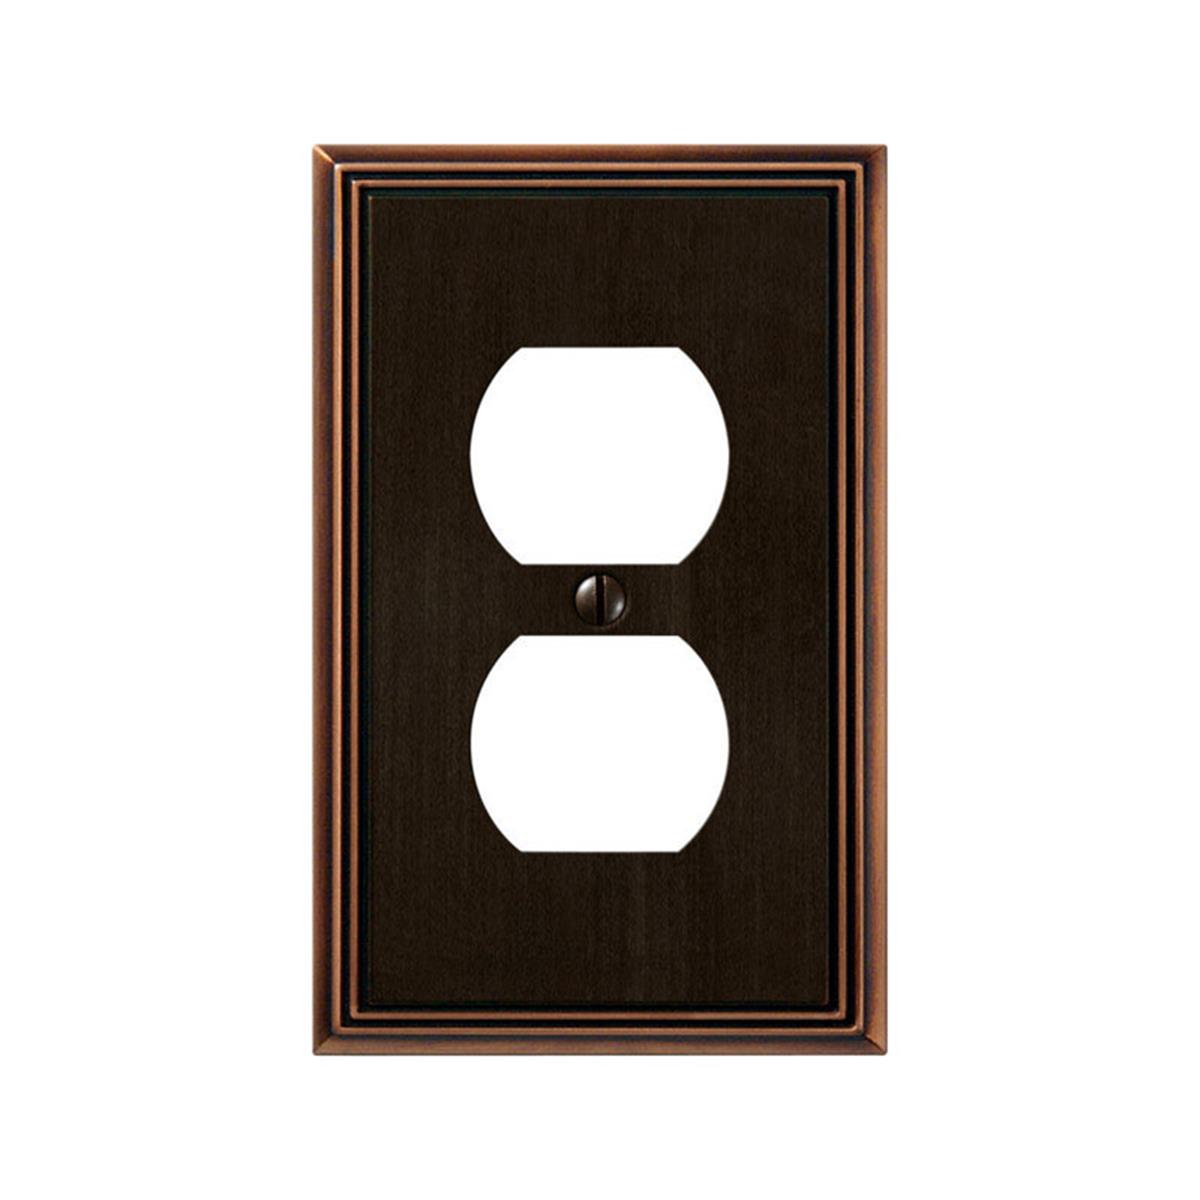 Picture of Amertac Holdings 3501921 1 Duplex Aged Bronze Wallplate